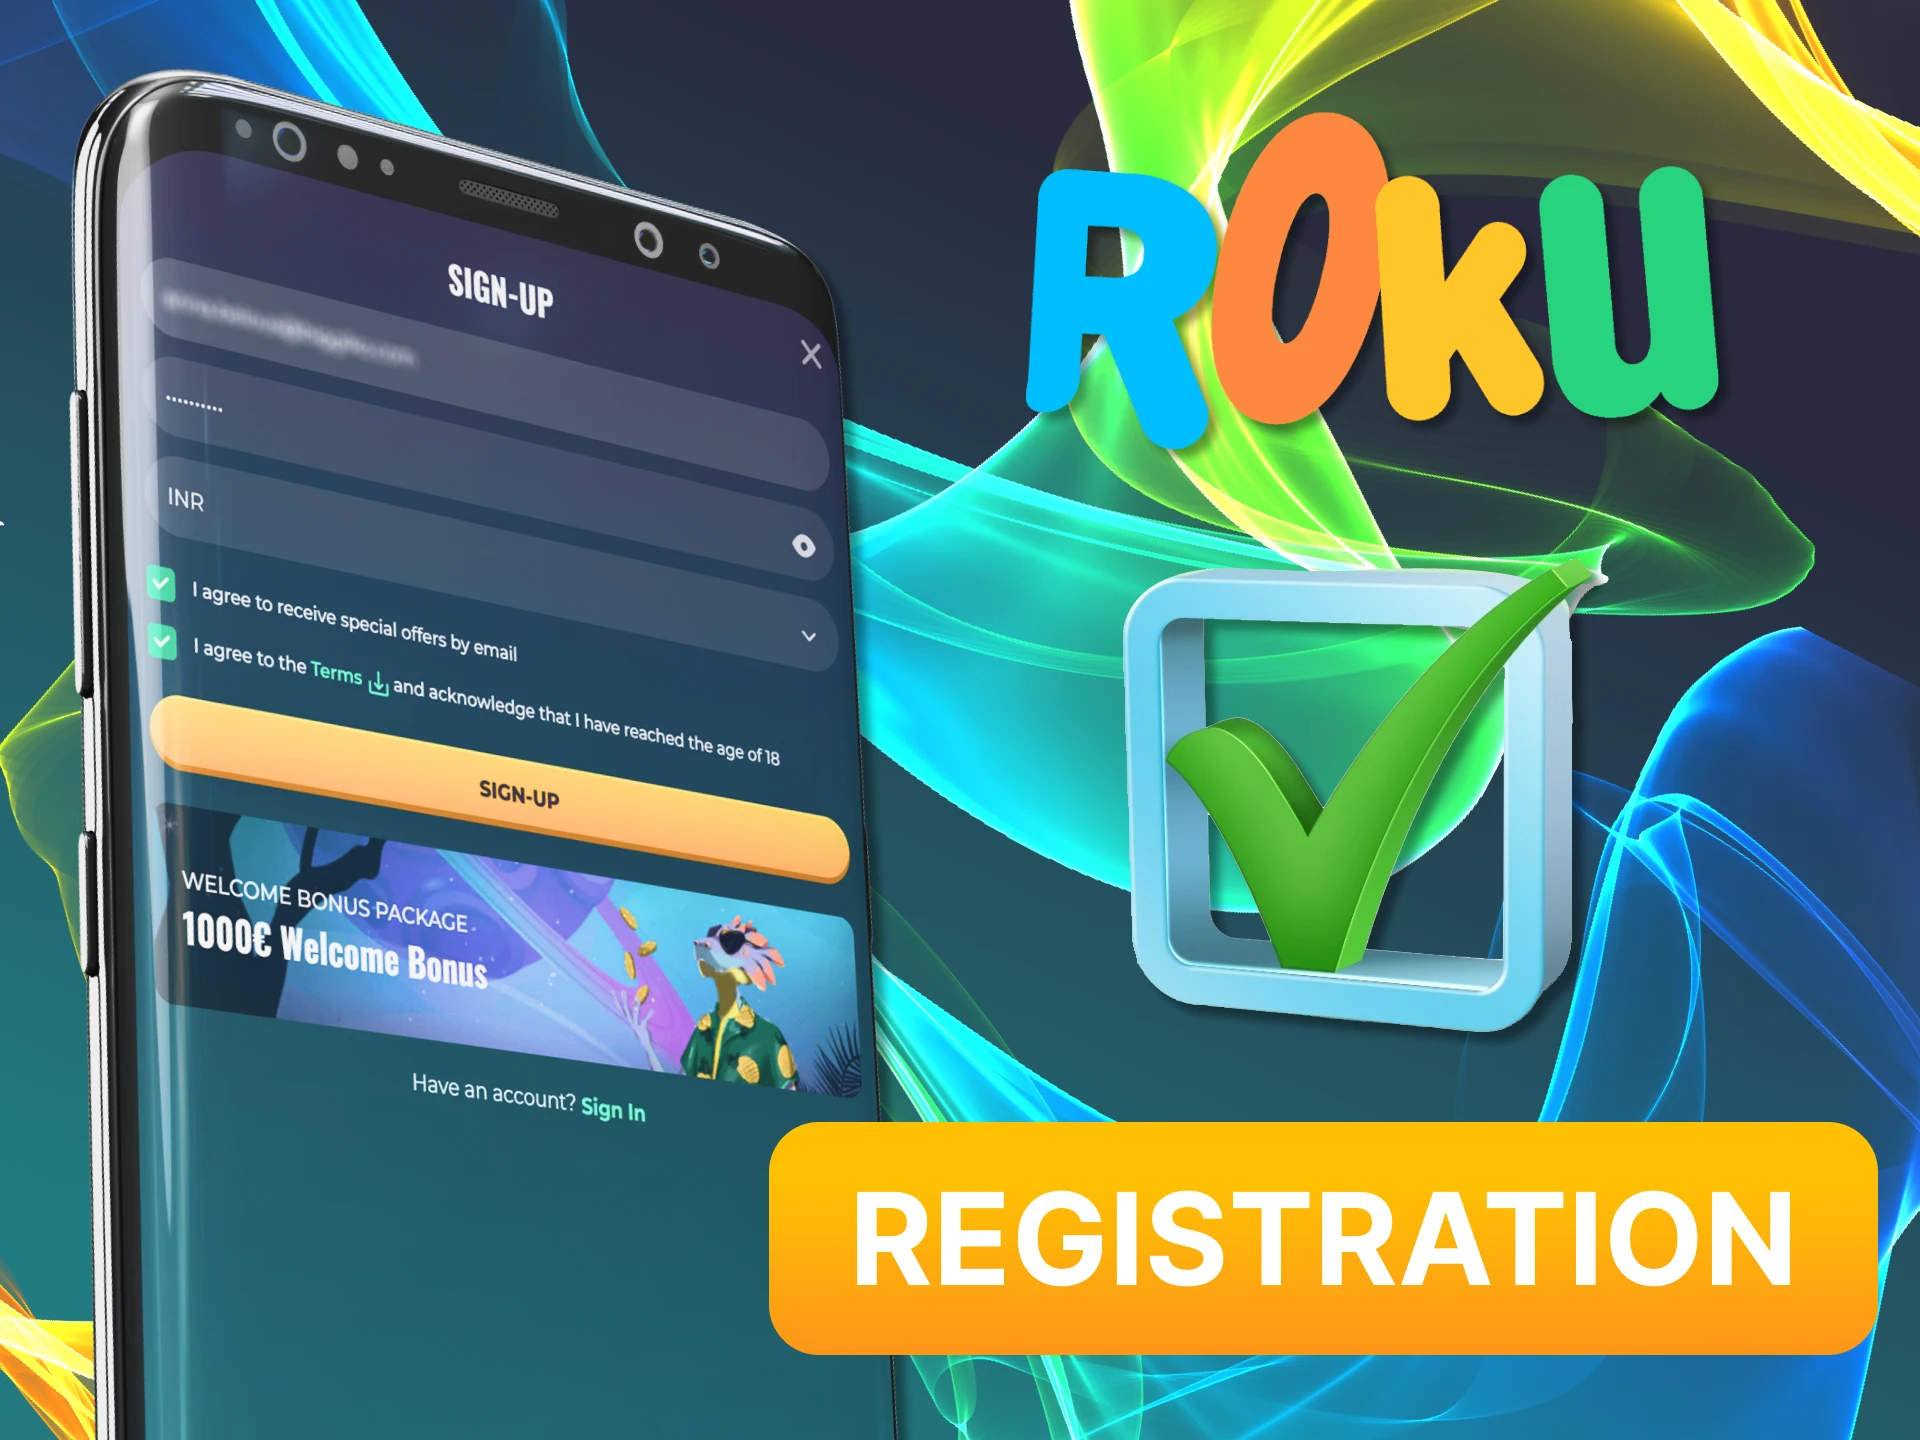 Complete a simple registration on the Rokubet app.